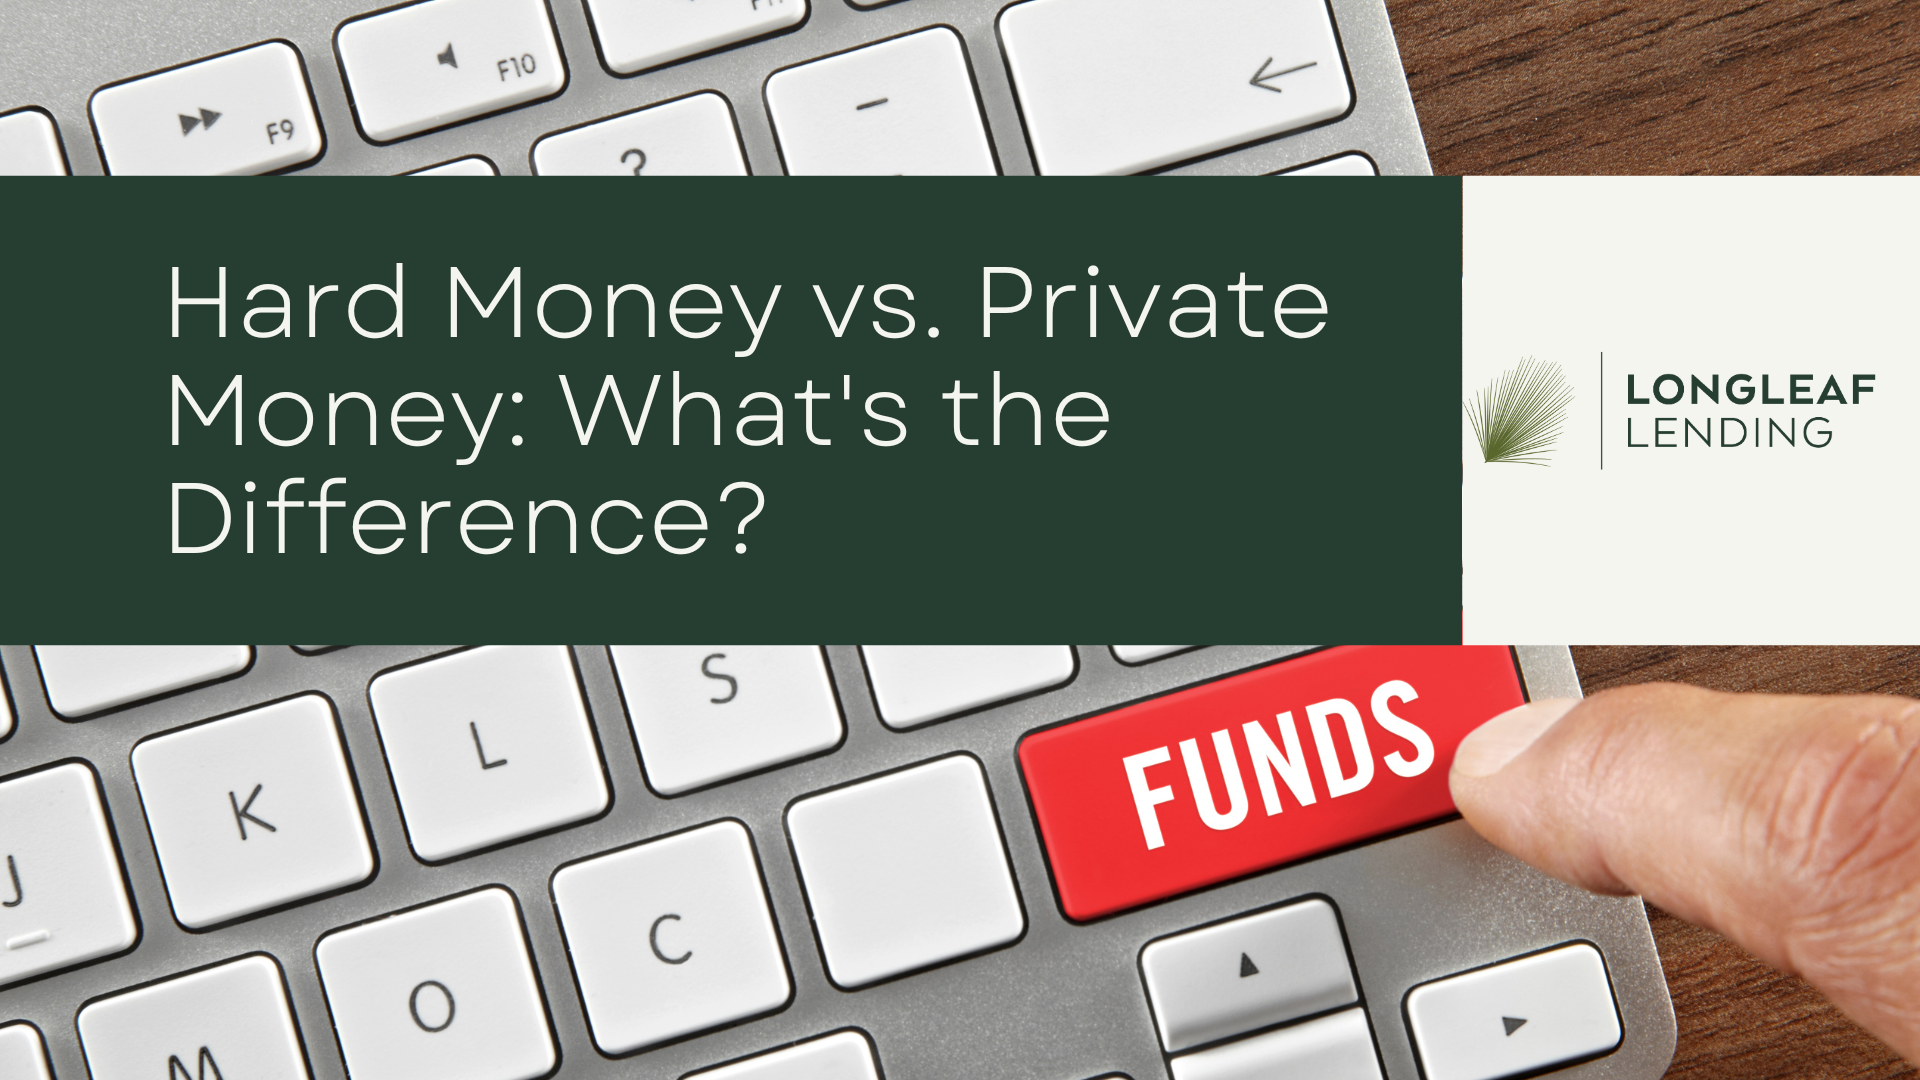 Hard Money vs. Private Money Lender: What's the Difference?